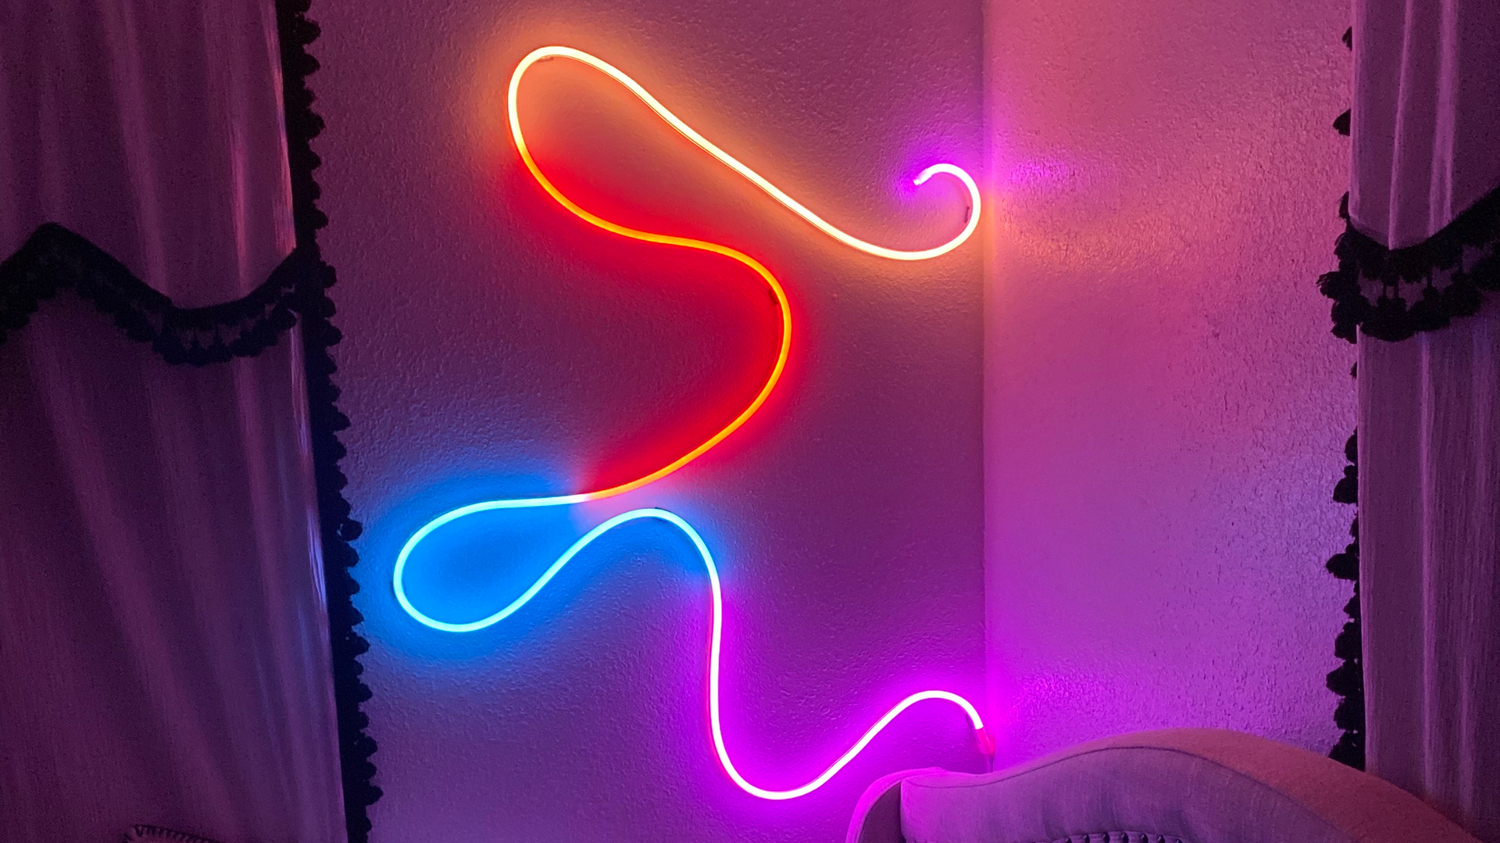 Colorful Feit Electric smart neon flex rope light on bedroom wall.